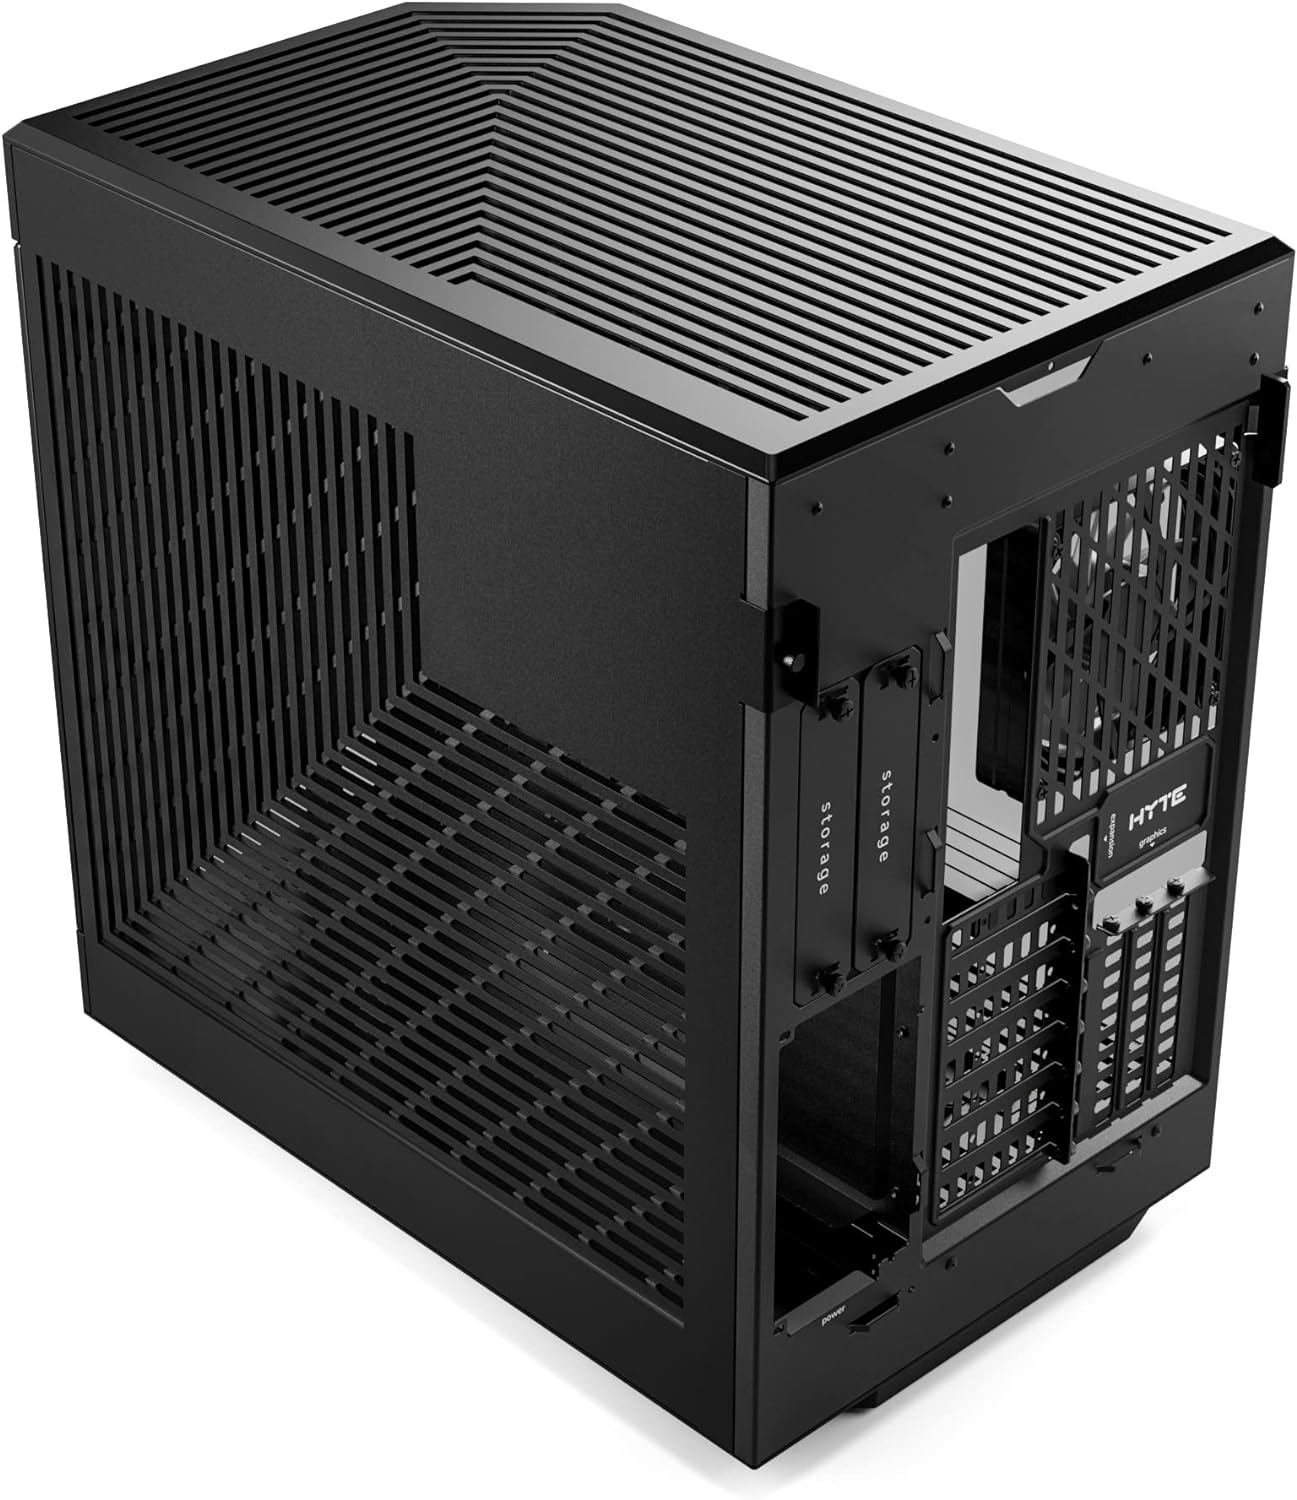 SKU: 0848604042855, Barcode: 848604042855 - HYTE Y60 Modern Aesthetic Mid-Tower ATX Gaming Case - Tempered Glass, PCIE 4.0 Riser Cable - Black: PCIE 4.0 Riser Cable included for seamless integration.